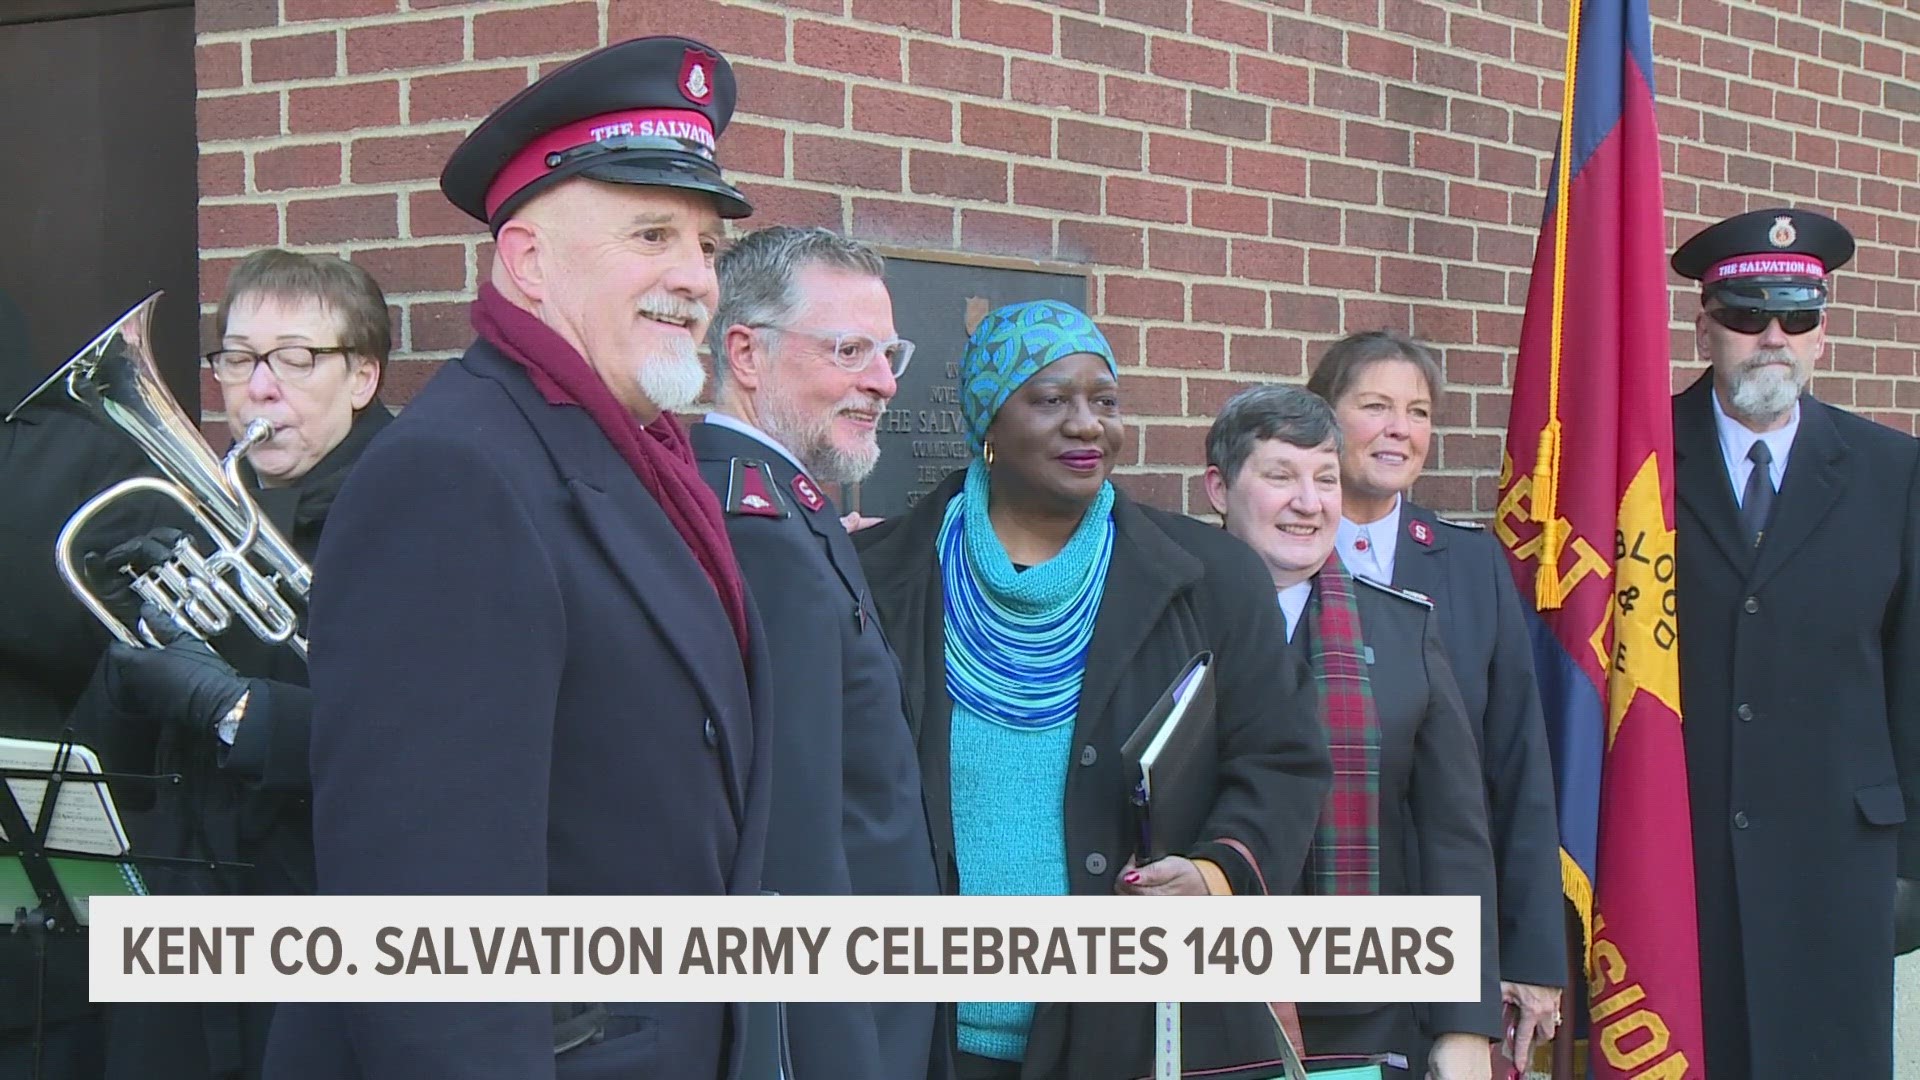 The first Salvation army in the state of Michigan was established in Grand Rapids back on Nov. 25, 1883.